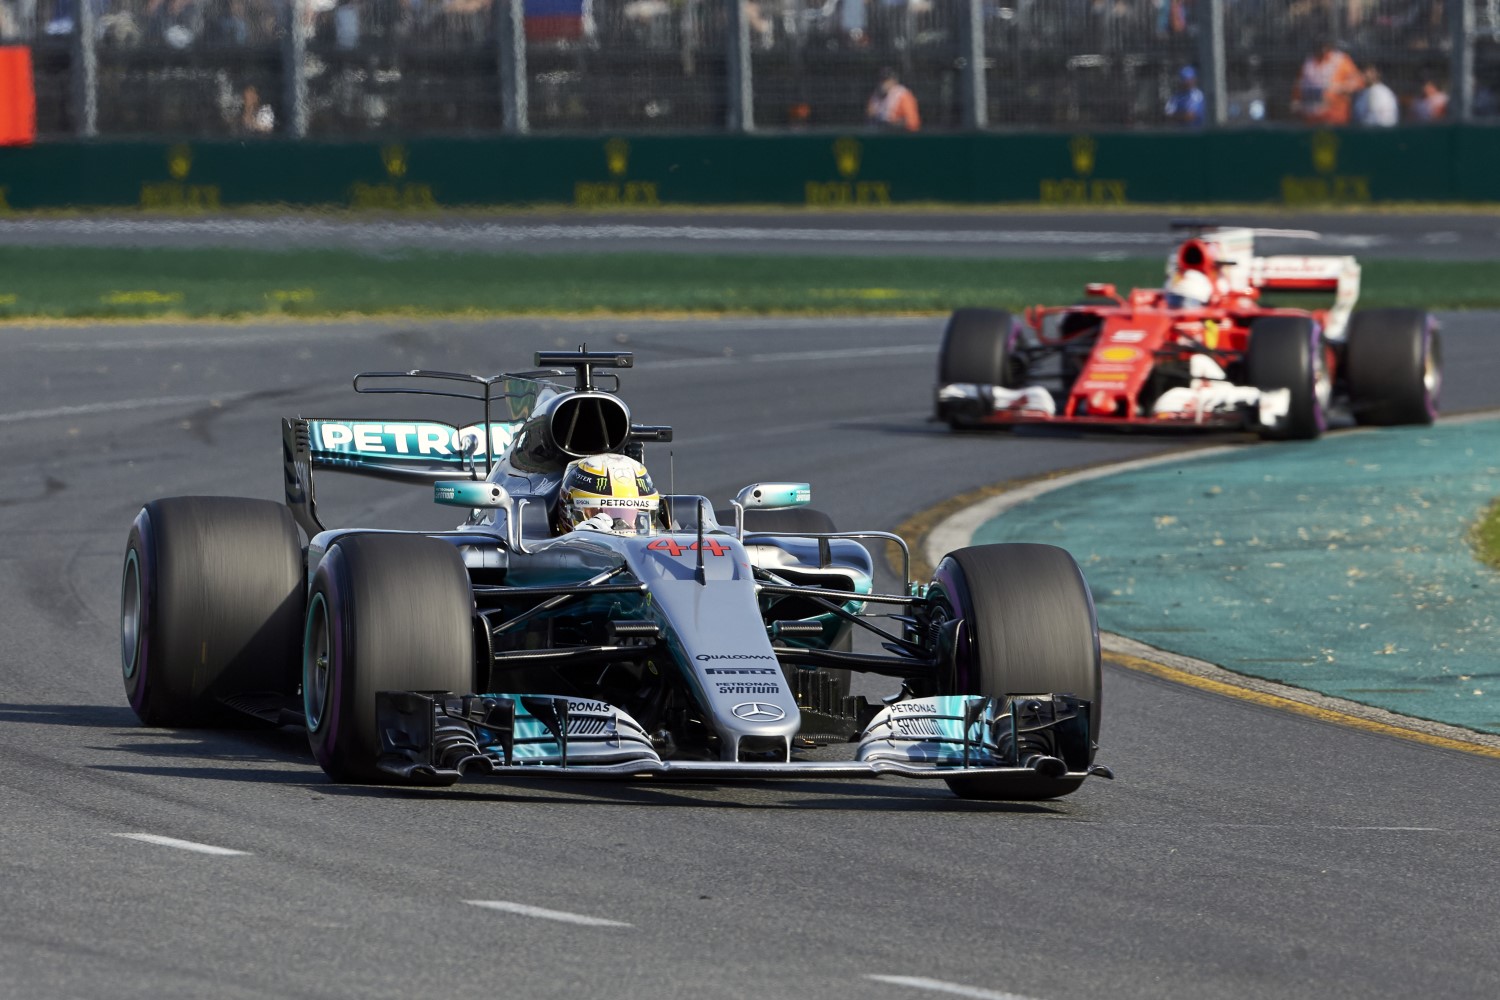 Vettel will be sucking Mercedes' exhaust fumes all year long